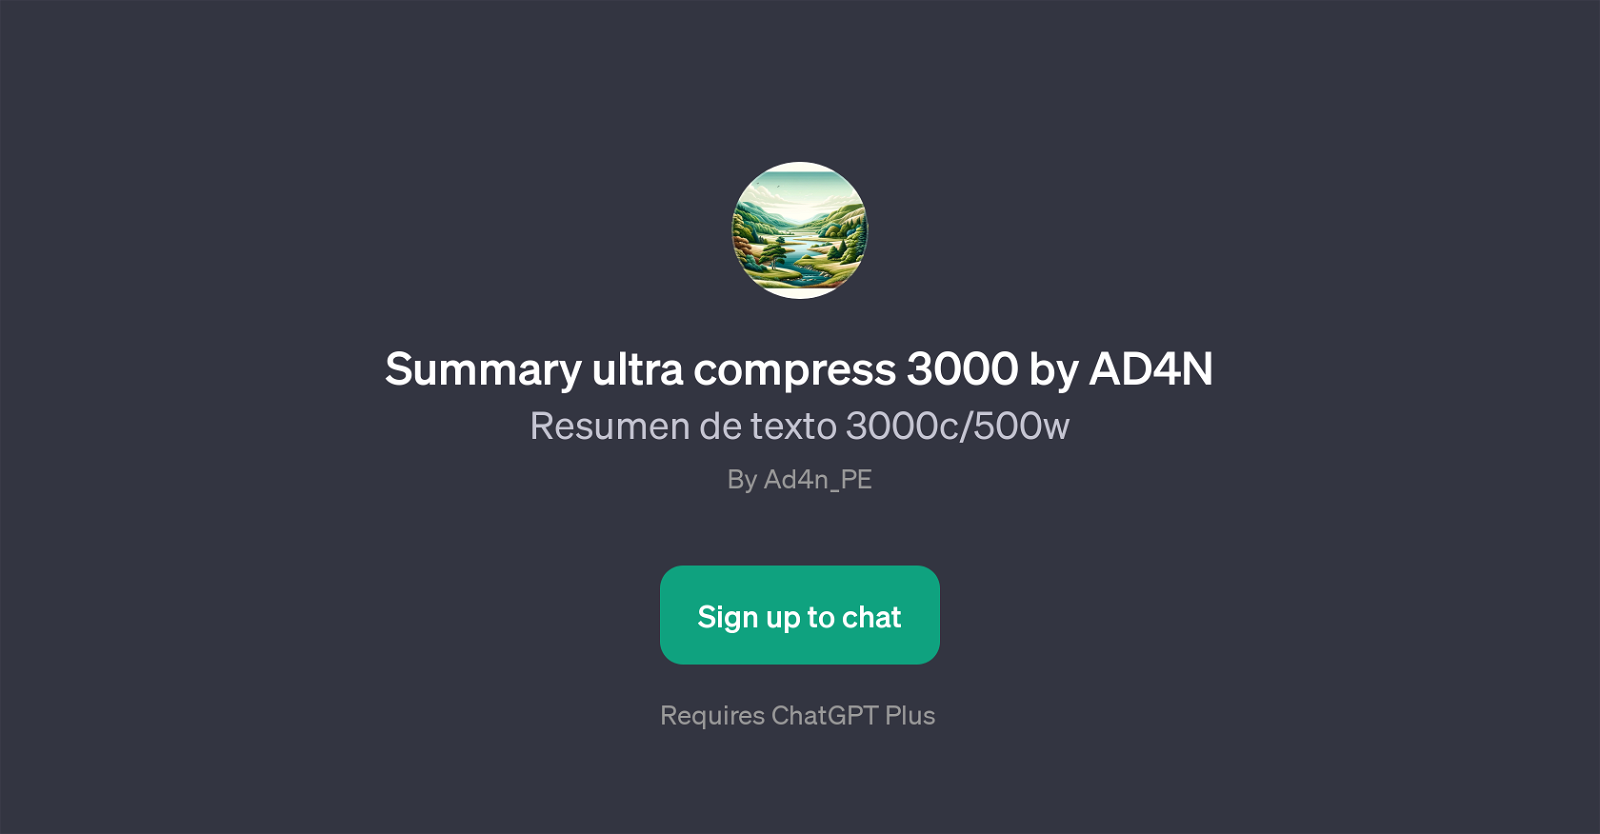 Summary ultra compress 3000 by AD4N website